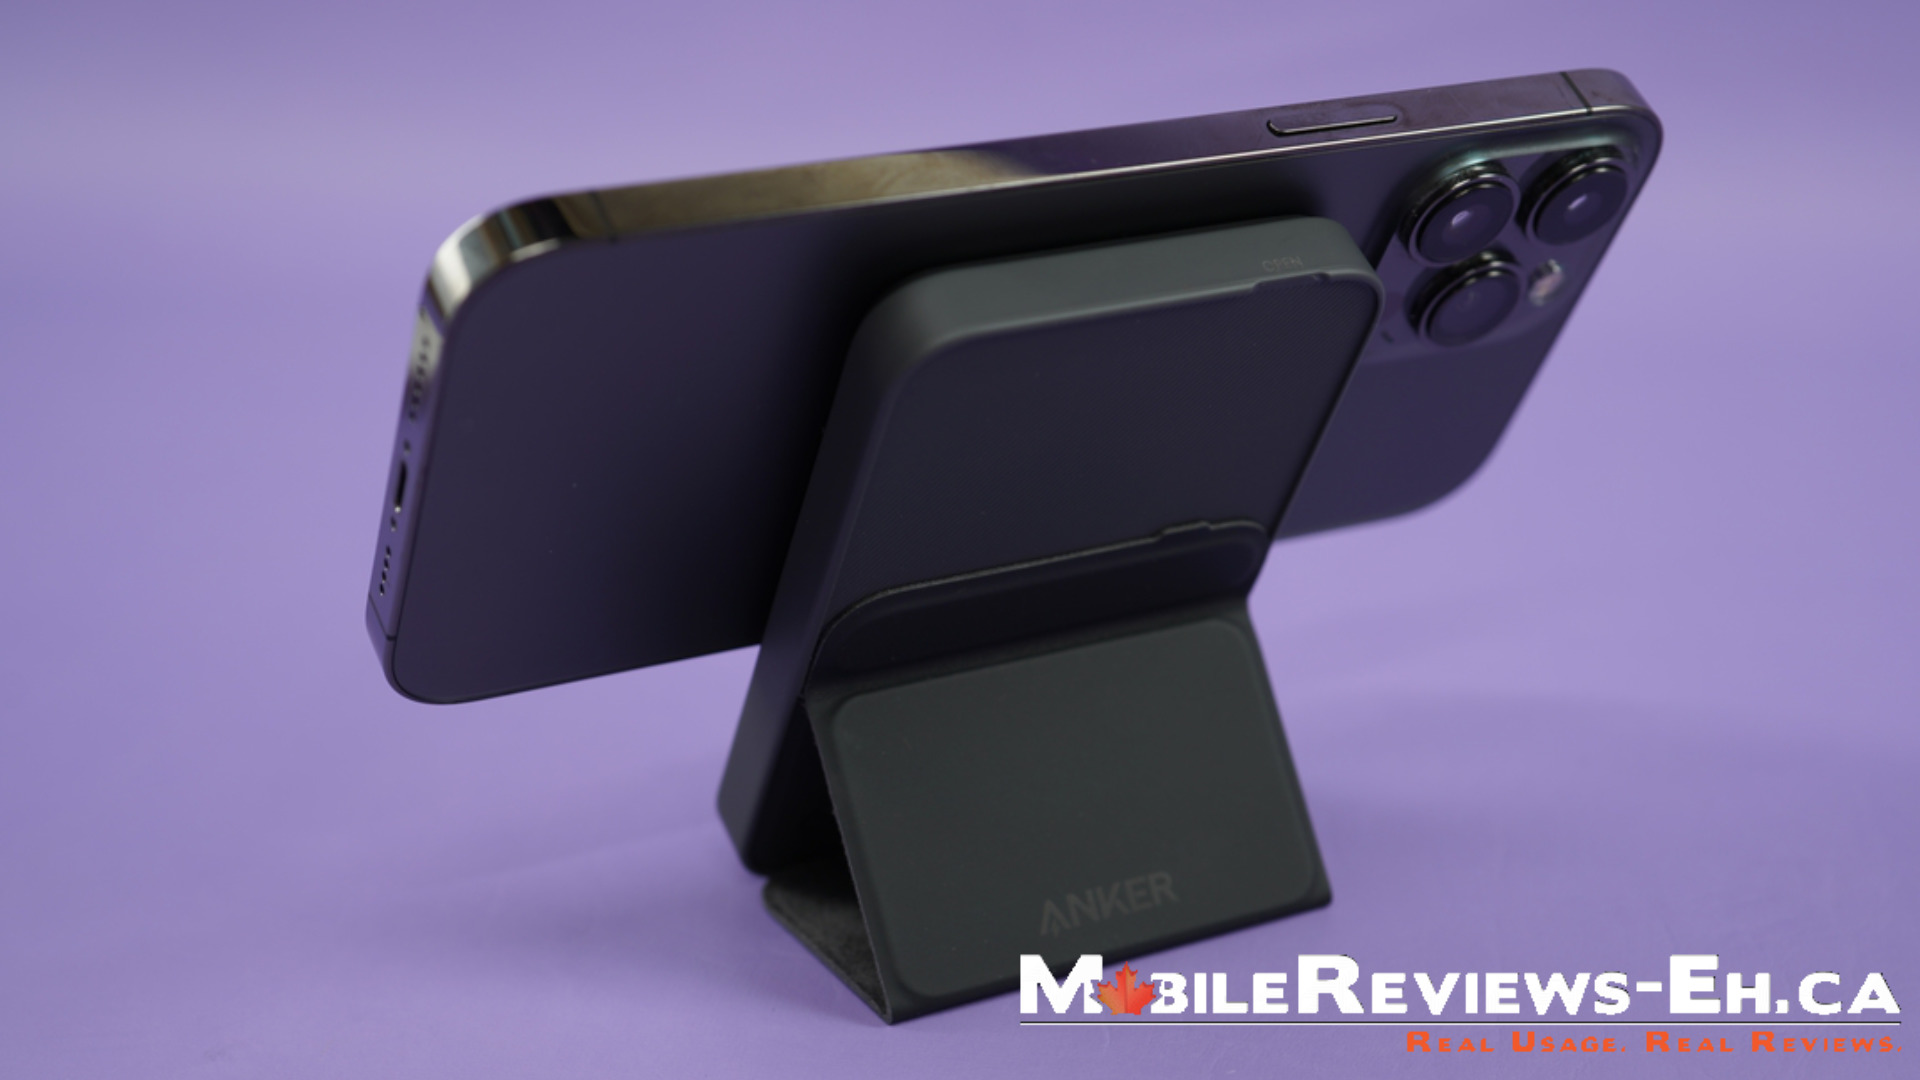 Anker 622 MagGo Magnetic Foldable Battery Review - Mobile